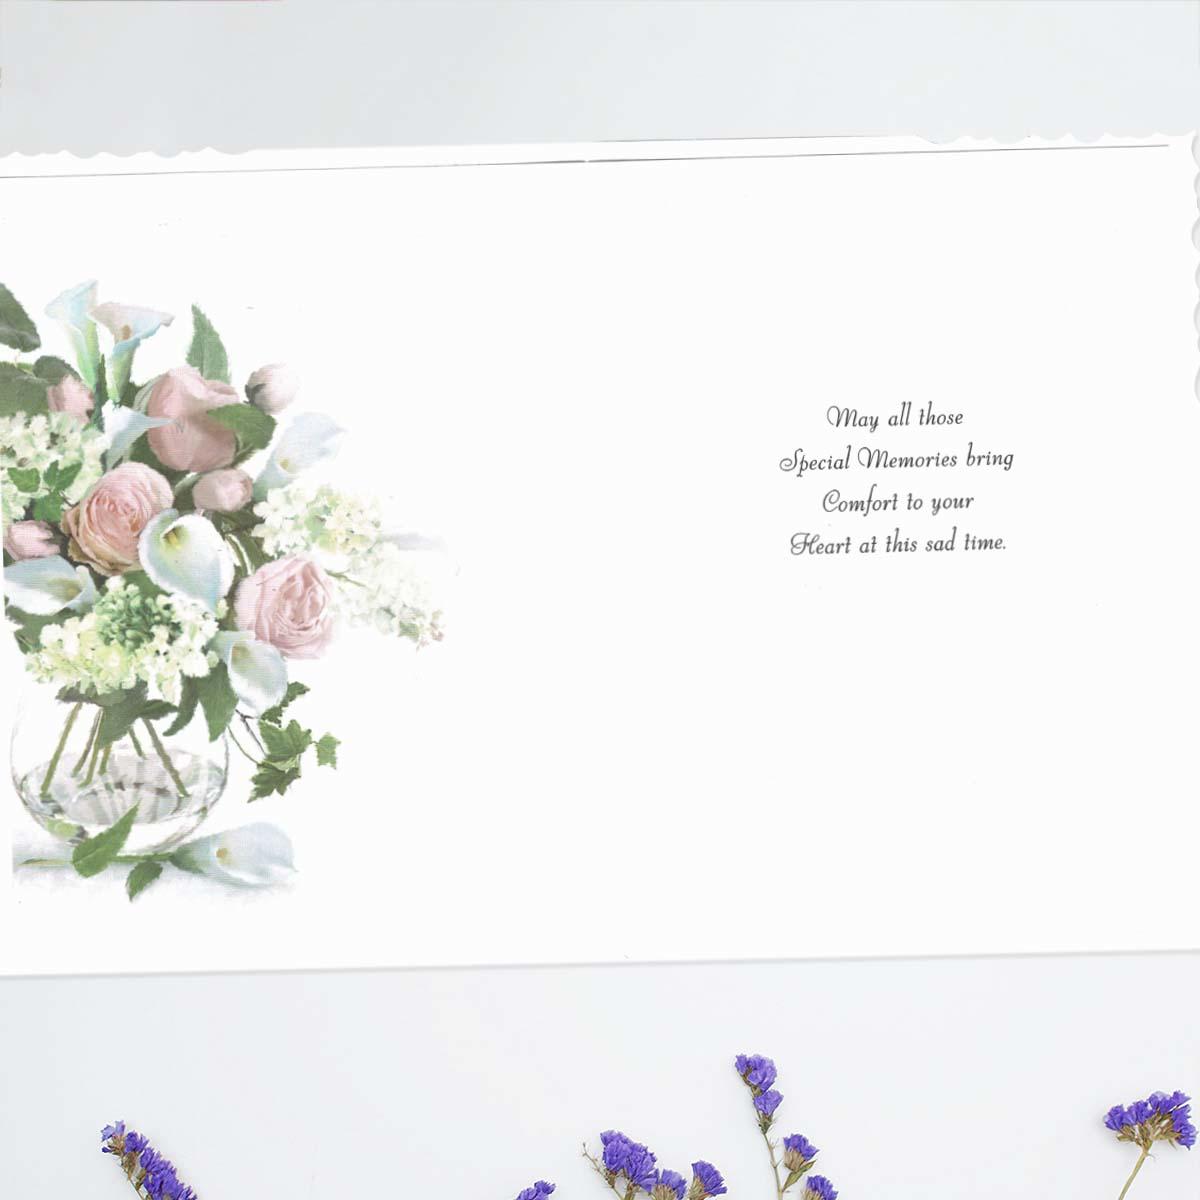 Inside with colour insert and heartfelt words